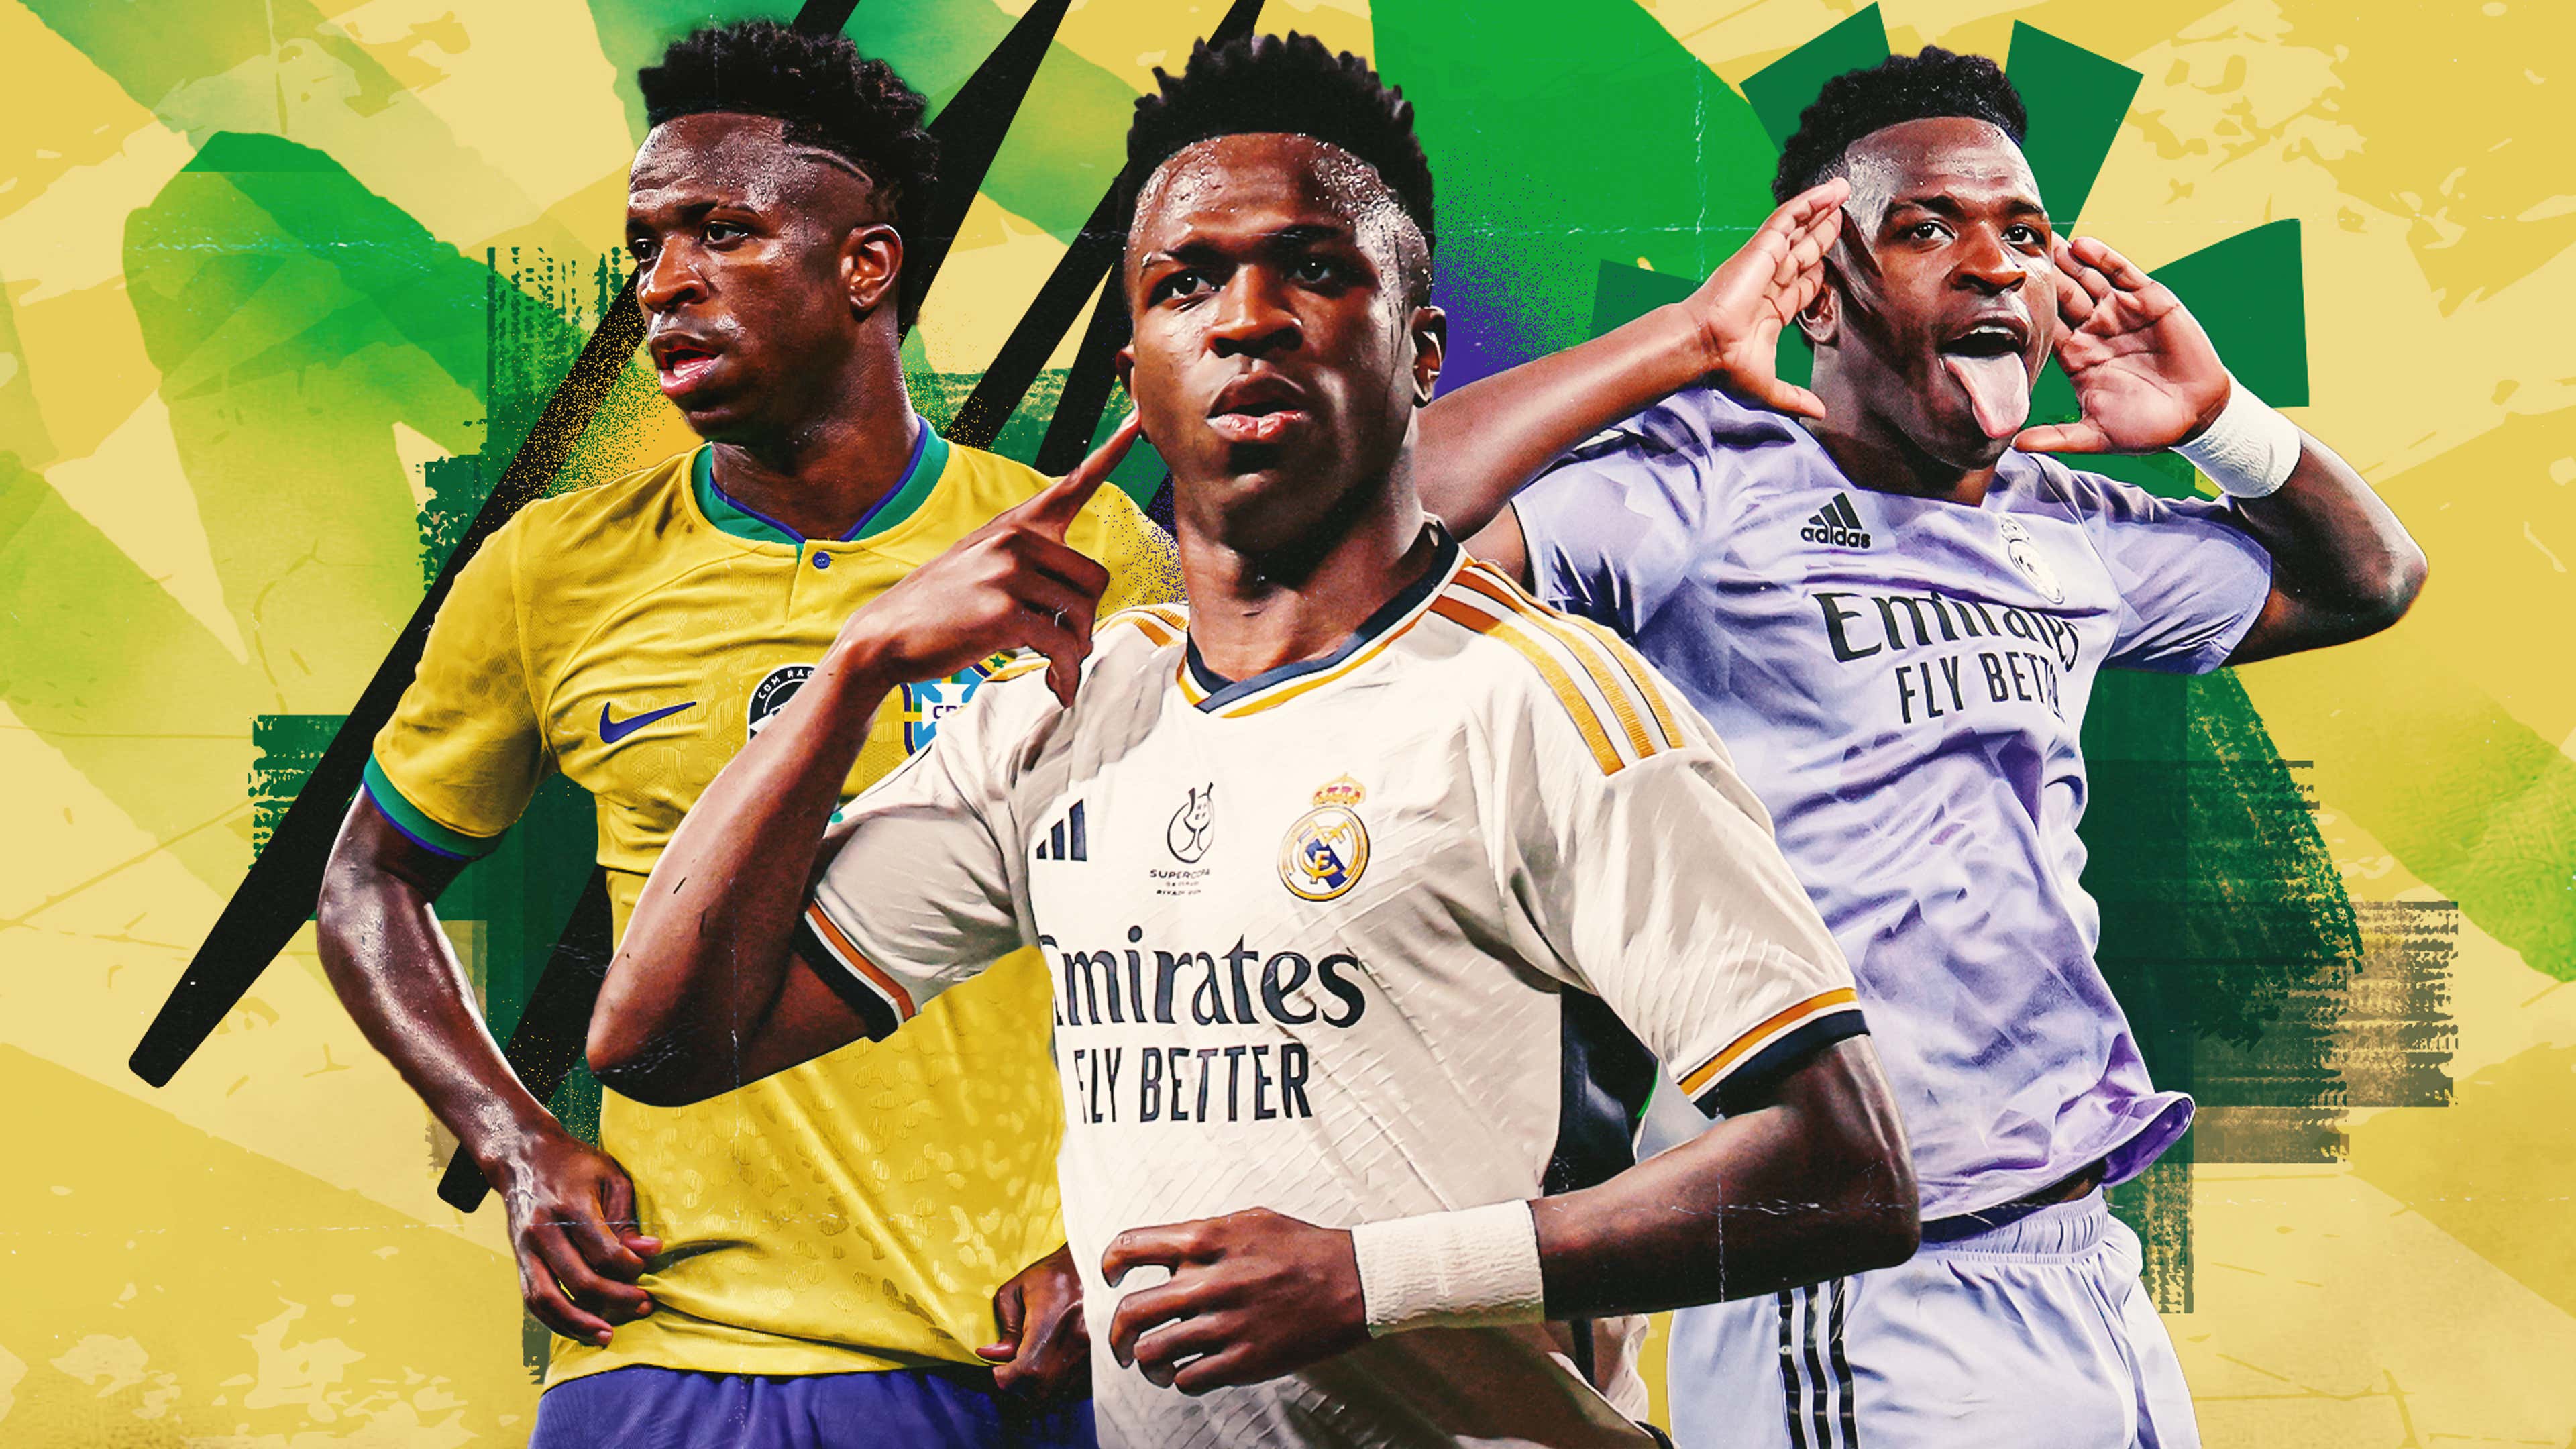 Explained: Why Vinicius Junior won't play for Real Madrid for 24